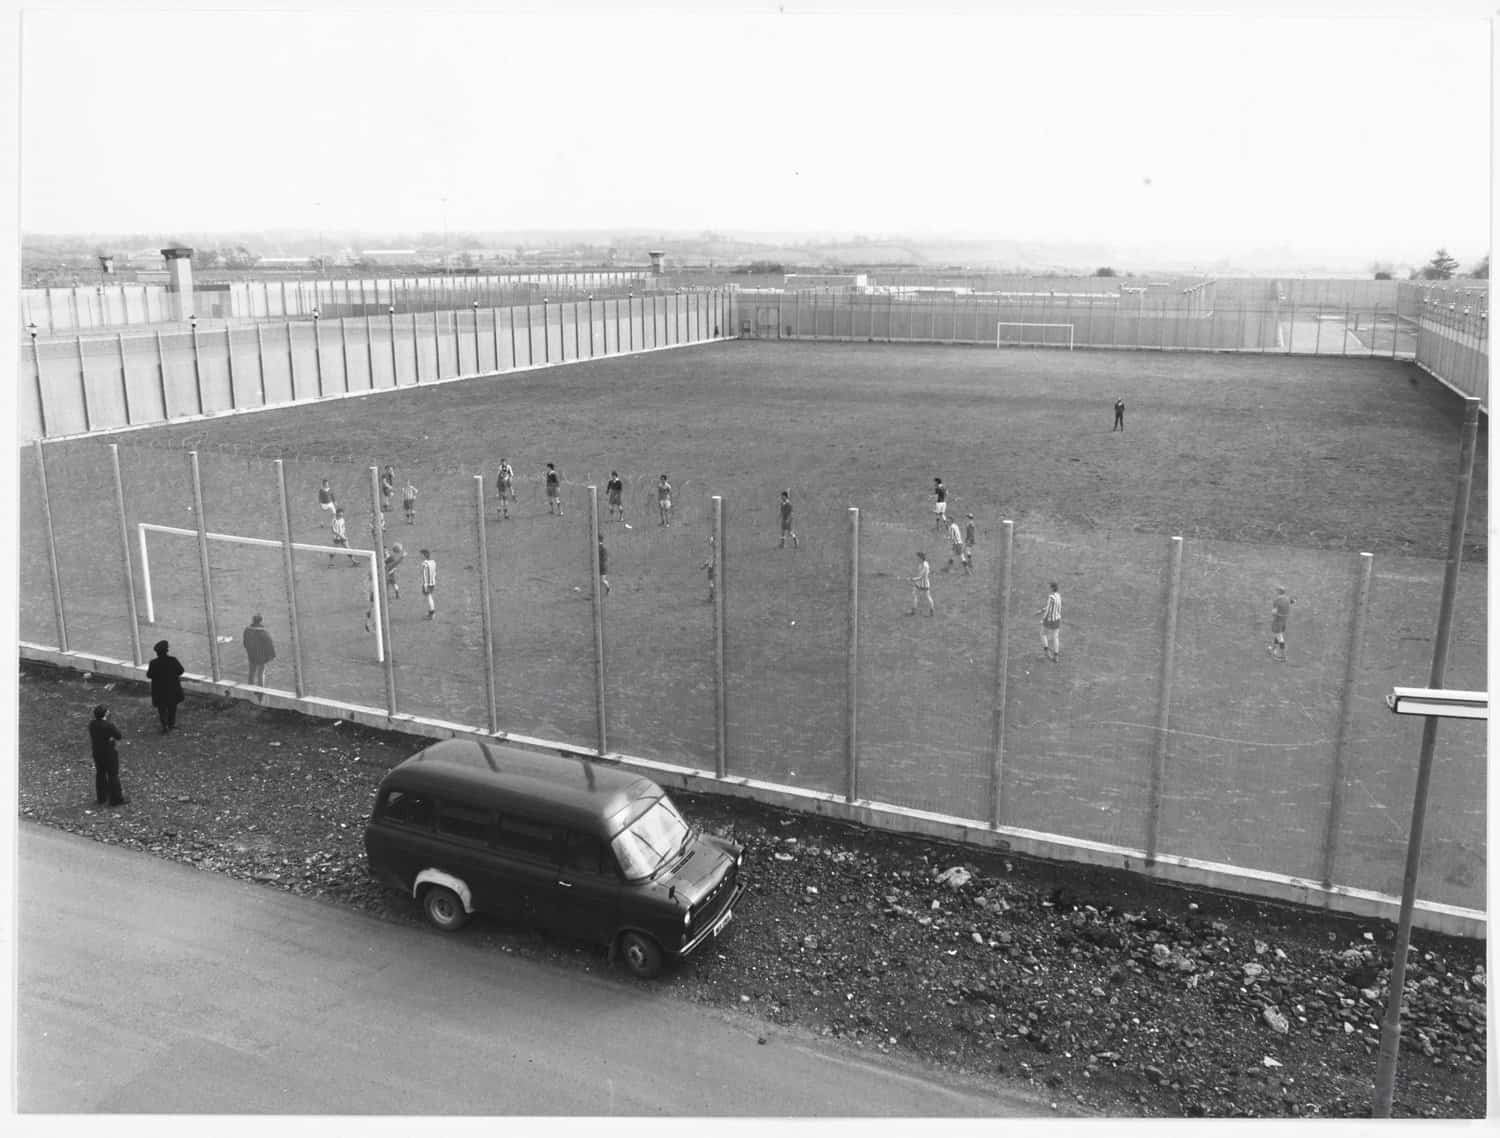 Football pitch, 1981, in Maze and Long Kesh.